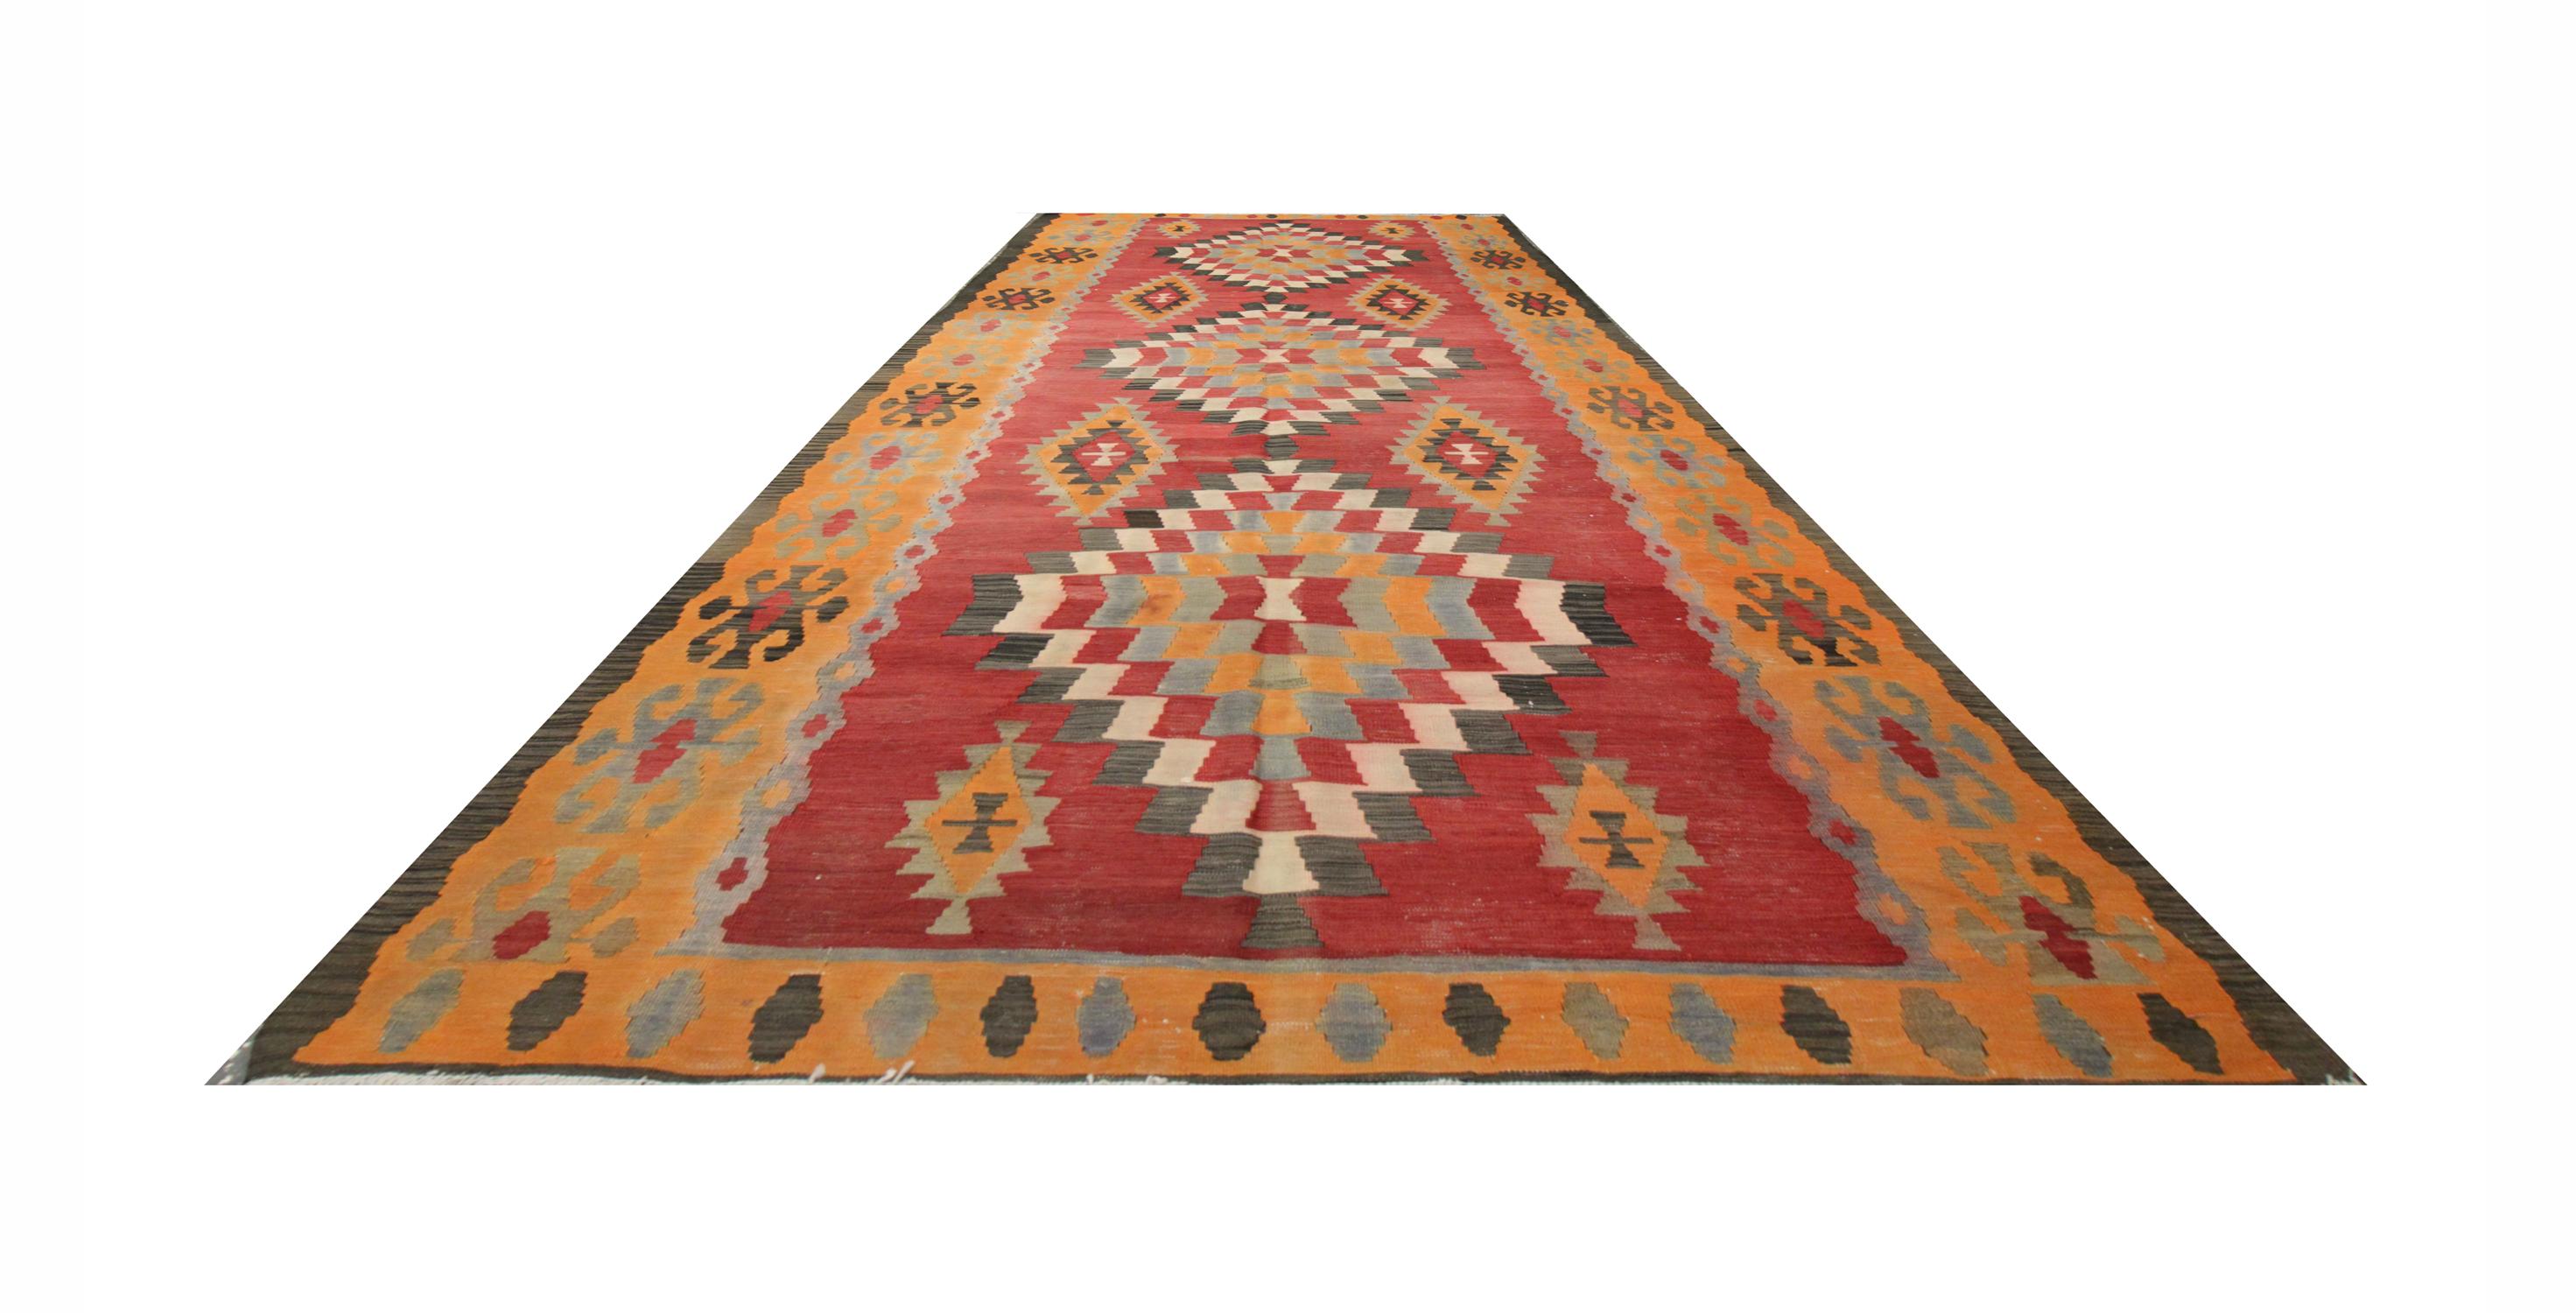 The rich tones in this colourful rug will complement your home's interior. The deep red background helps the orange, grey and blue tones to pop in this geometric design. Featuring a bold trio of geometric medallions with a highly decorative